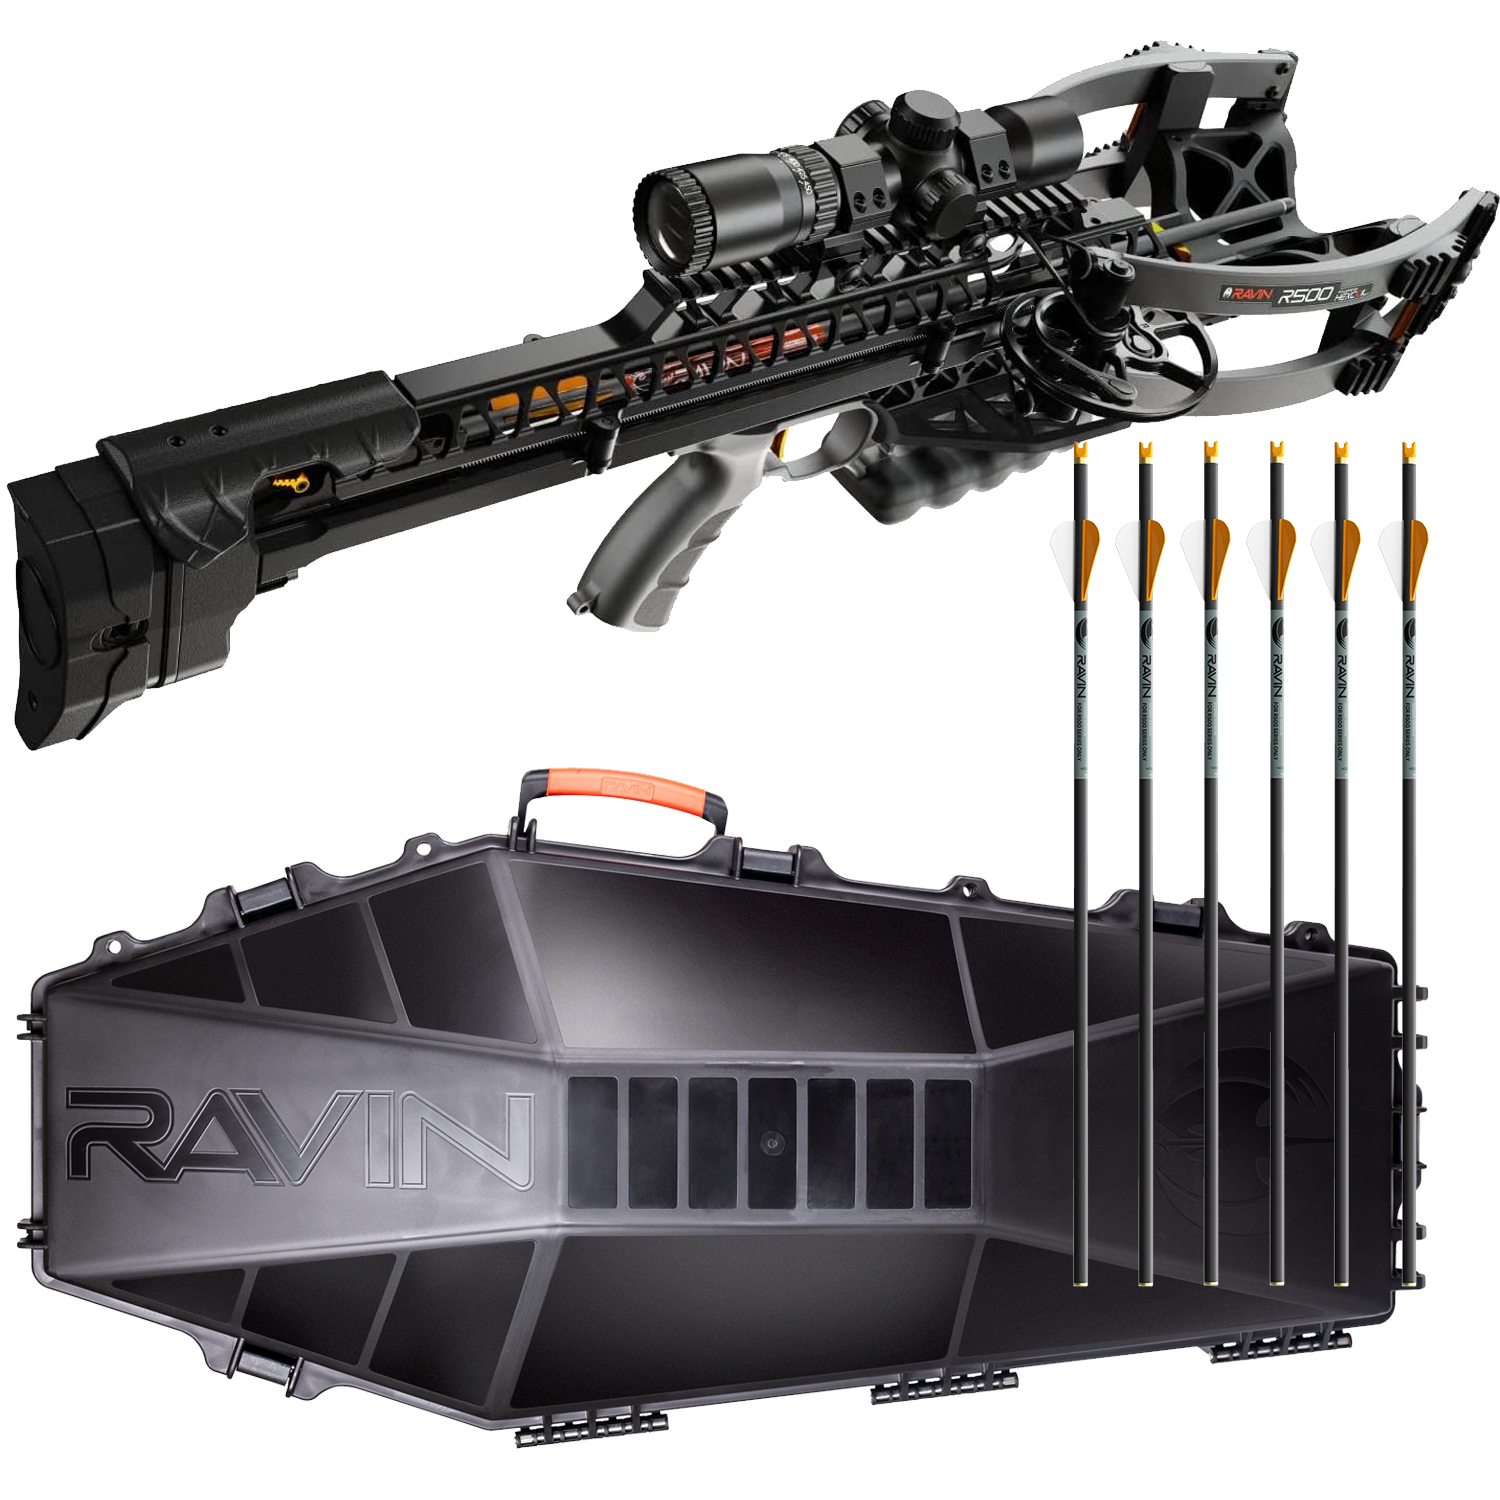 ravin-crossbows-r26x-crossbow-400fps-deluxe-package-with-free-soft-case